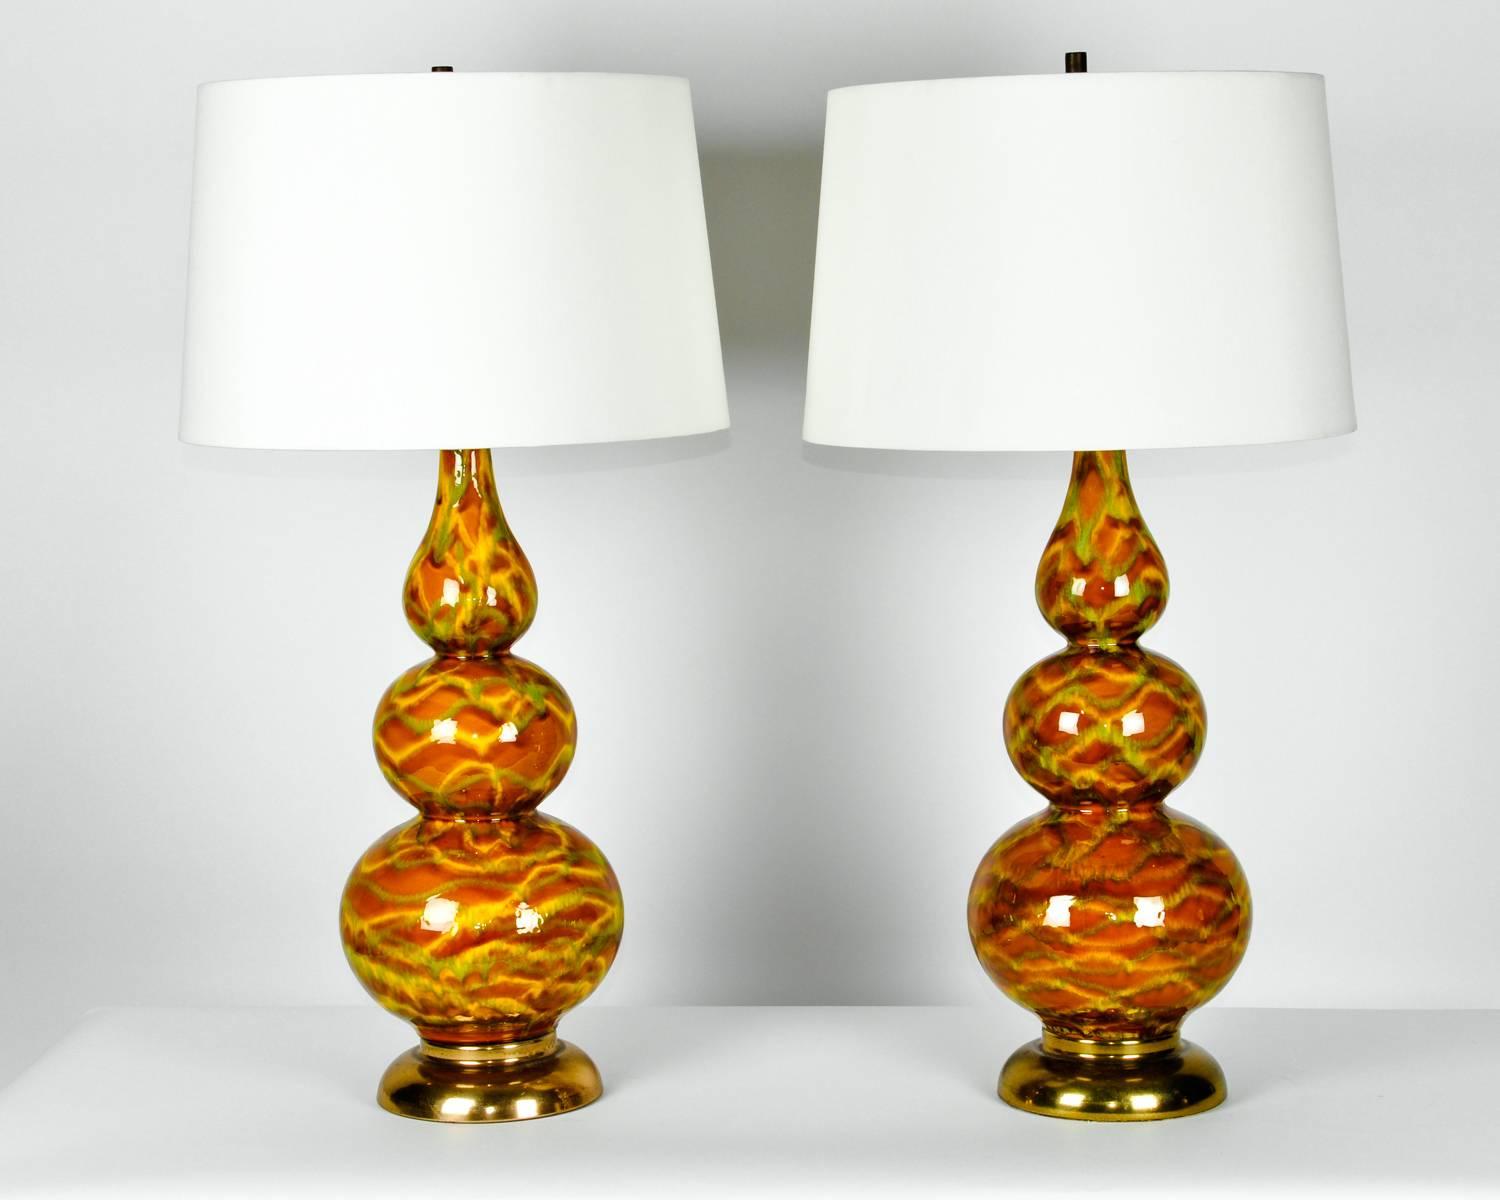 Vintage porcelain pair table lamps with brass base. Each lamp in excellent working condition. Each lamp measure 32 inches high x 8 inches diameter. Each lamp comes with a round drum silk exterior shade 11